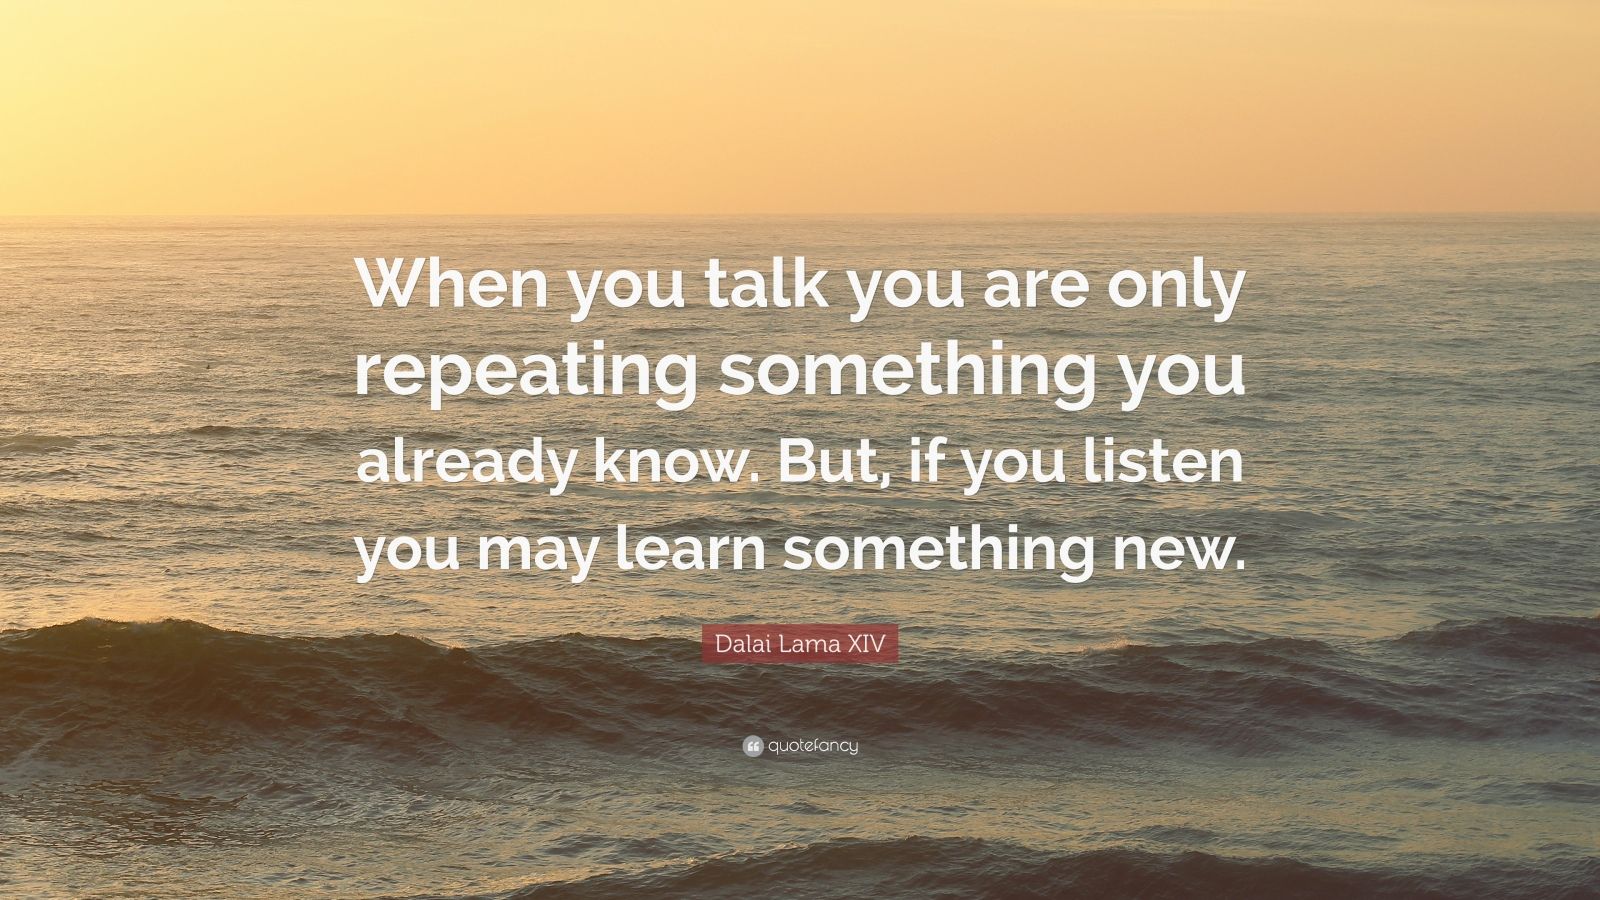 Dalai Lama XIV Quote: “When you talk you are only repeating something ...